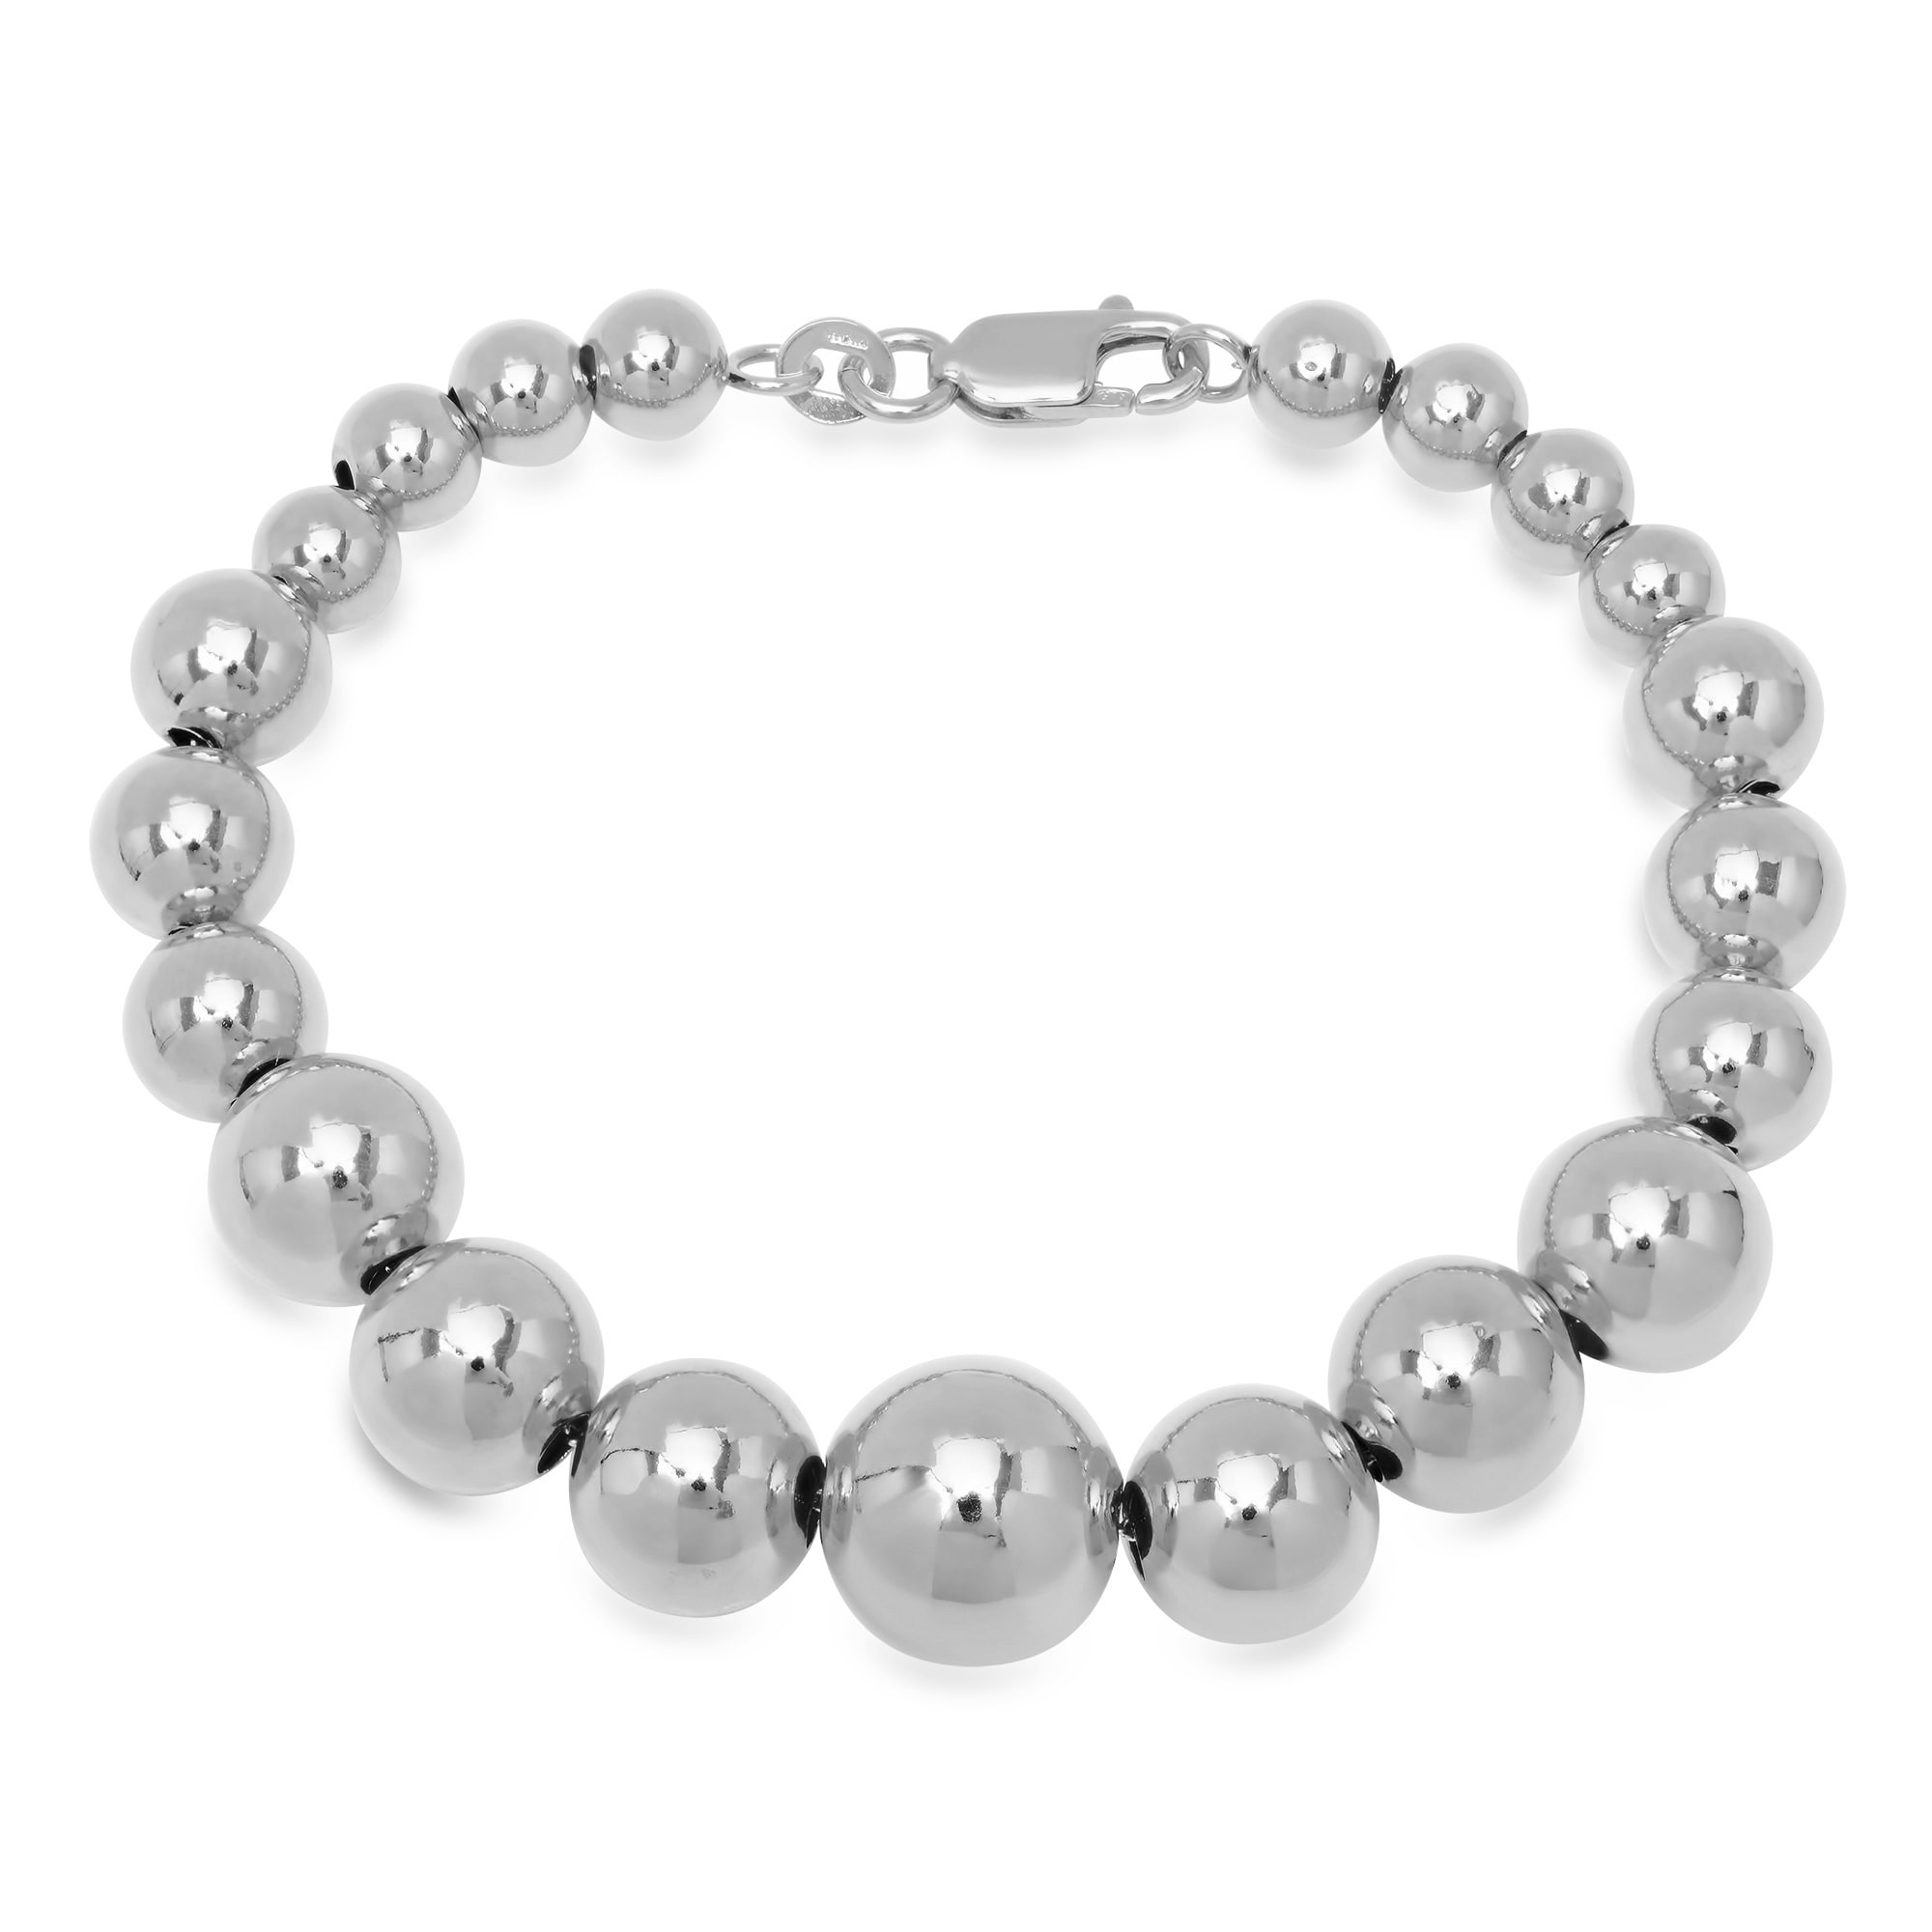 Sterling Silver Graduated Bead Bracelet 7 Inch Overstock 7860308